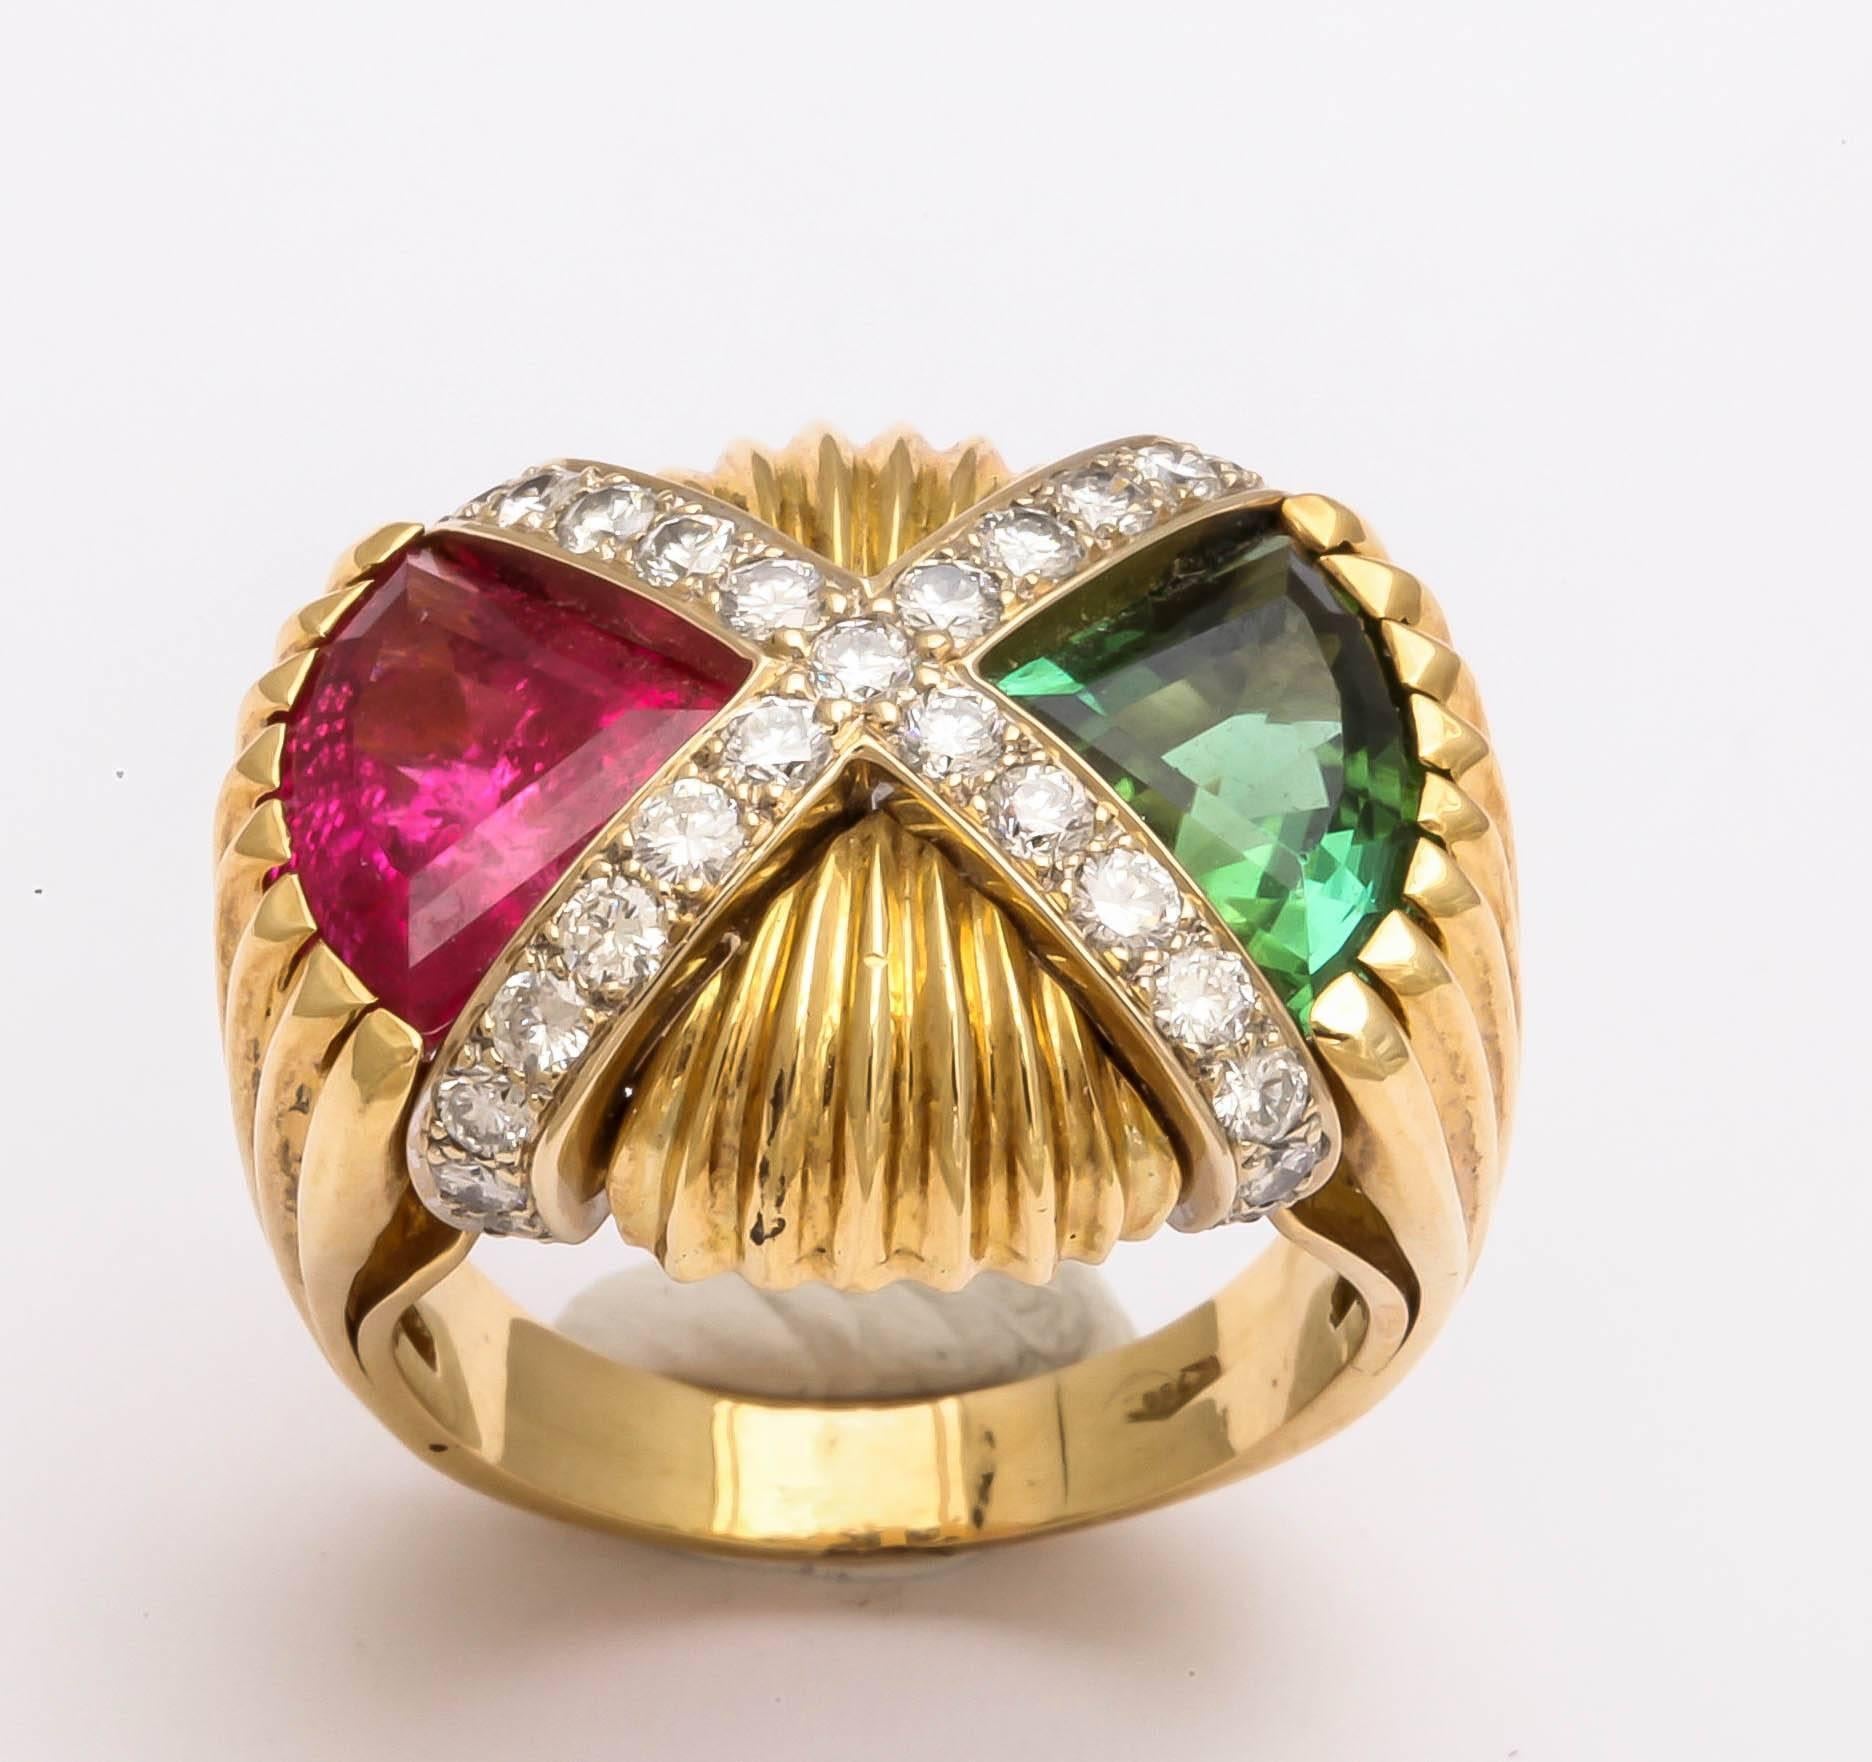 Impressive Pink and Green Tourmaline Diamond Gold Ring For Sale 1